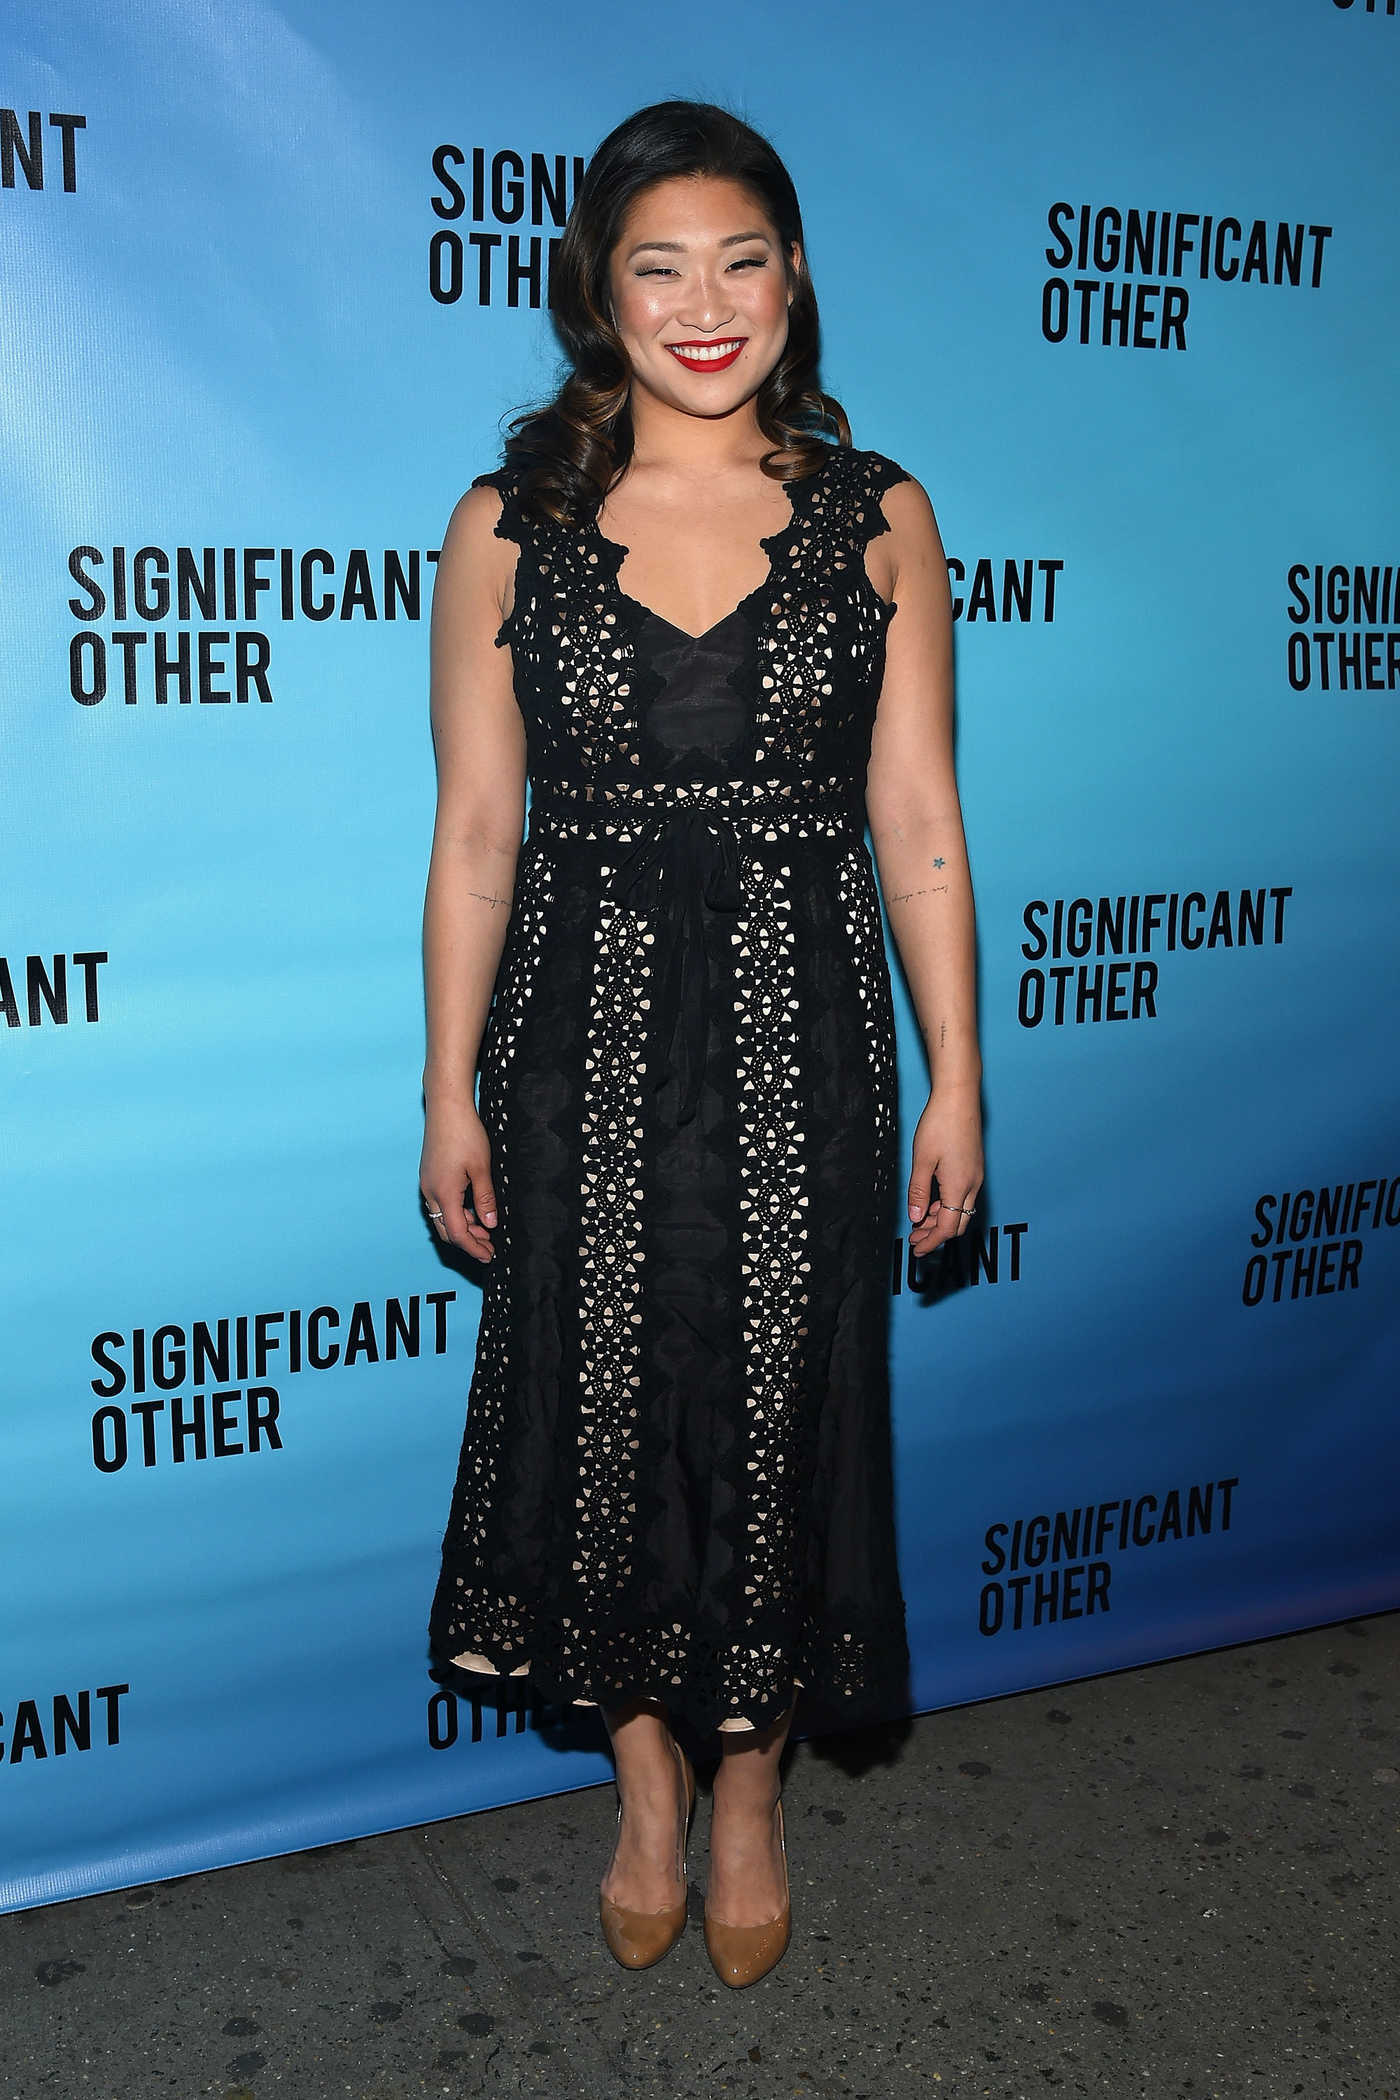 Jenna Ushkowitz Attends the Broadway Opening Night performance for Significant Other at the Booth Theatre 03/02/2017